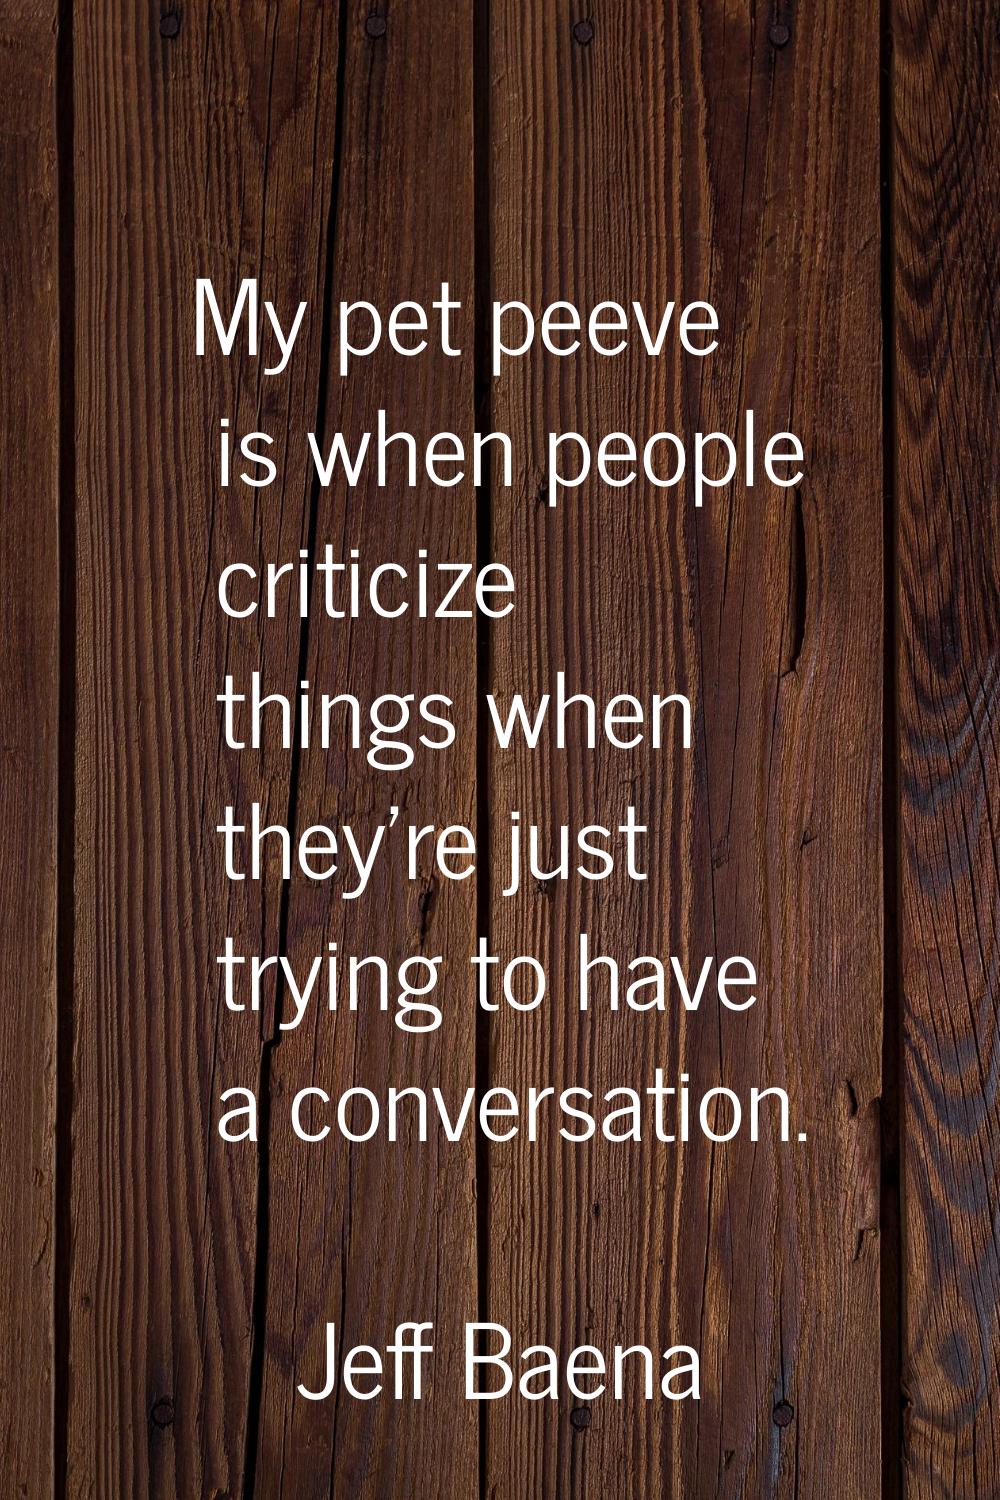 My pet peeve is when people criticize things when they're just trying to have a conversation.